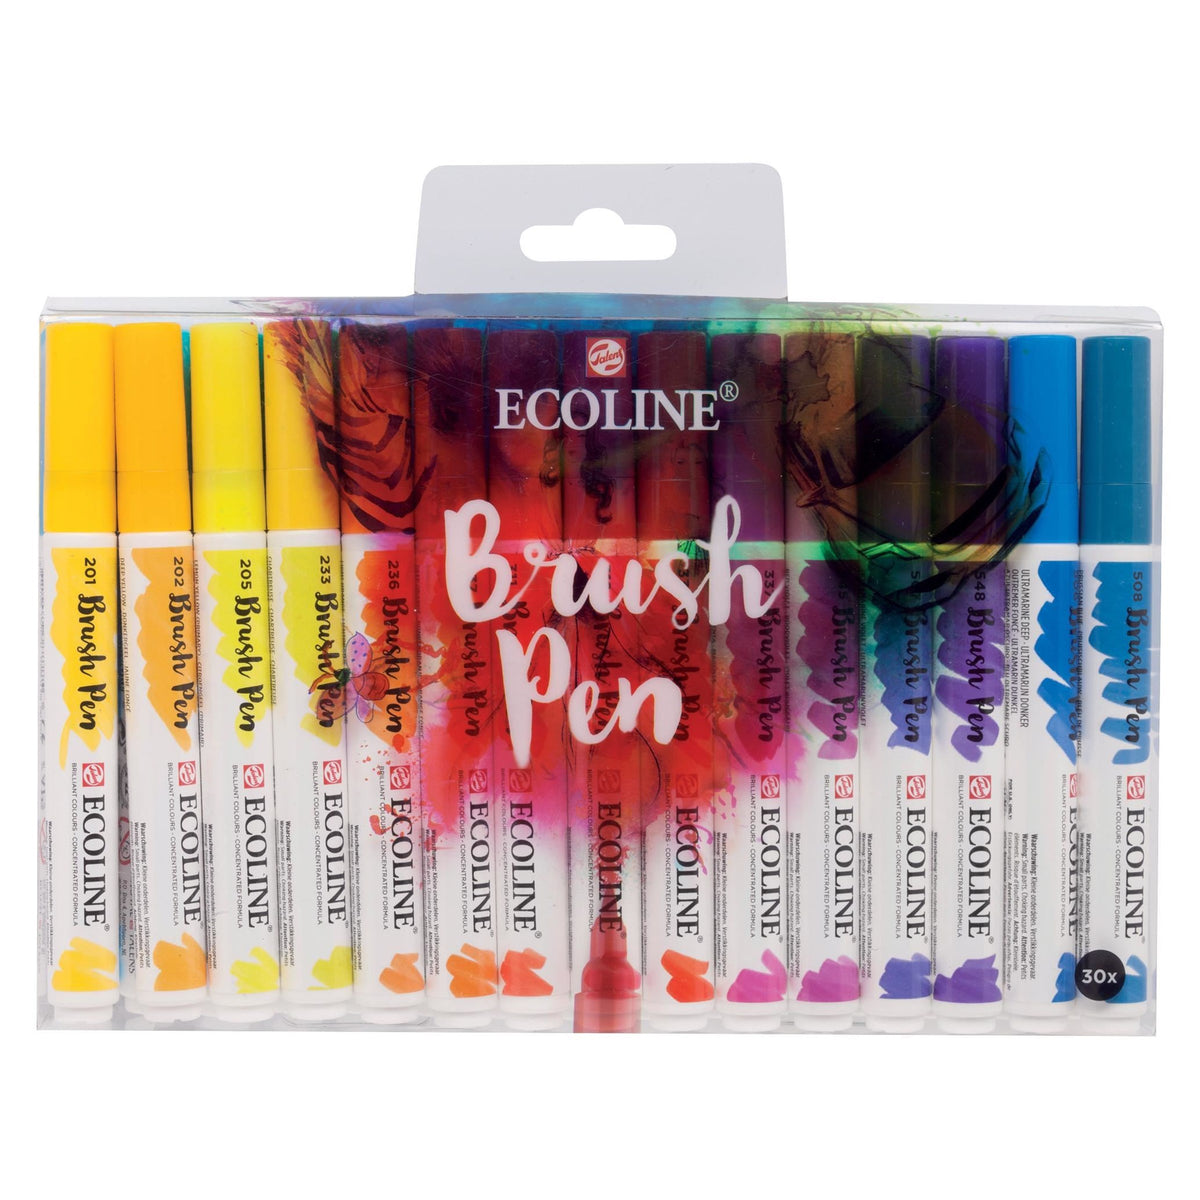 Brush Pen Review: Royal Talens Ecoline Brush Pens - The Well